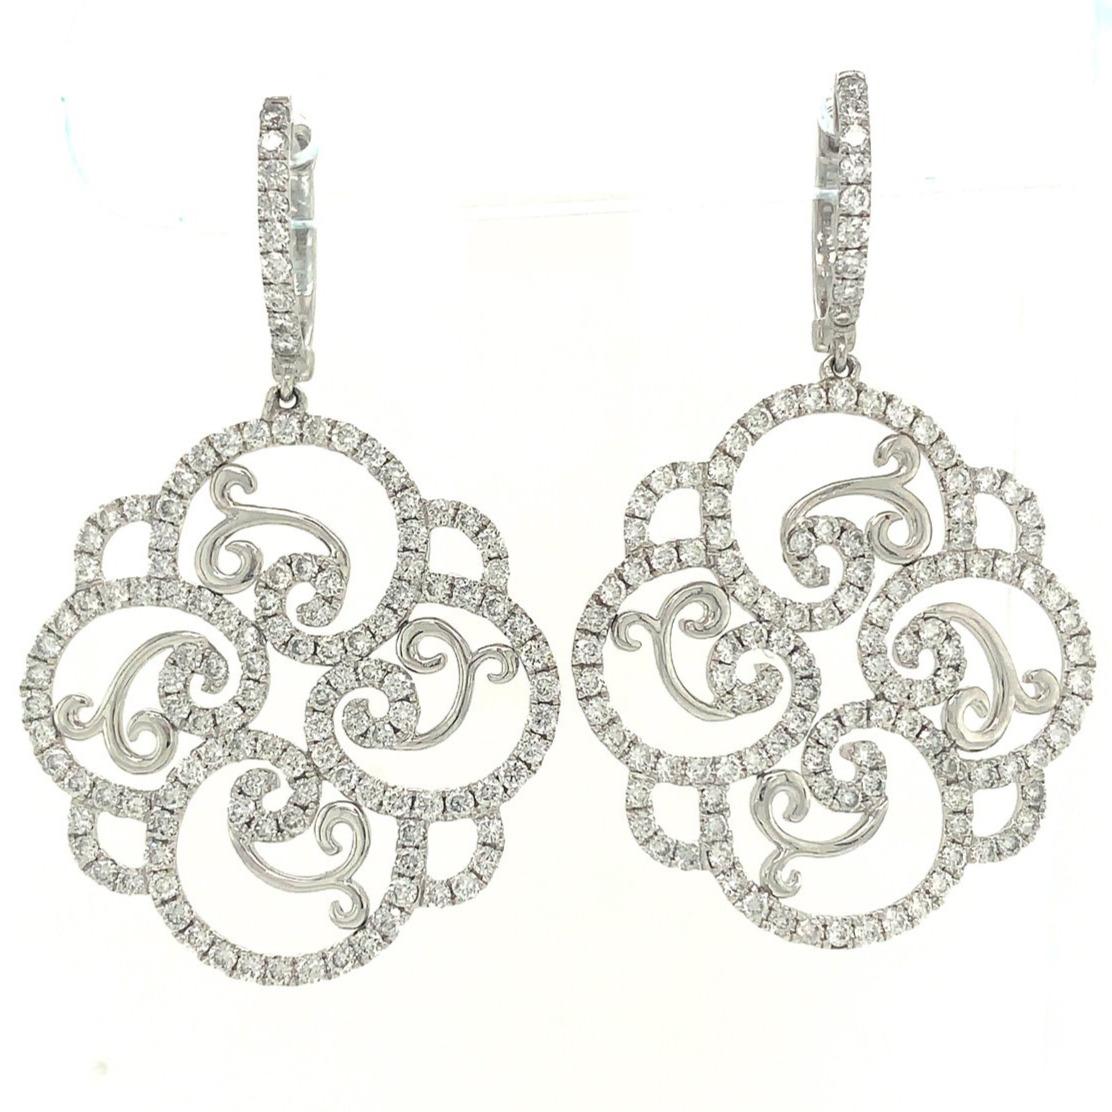 This One Of A Kind Diamond Filigree Swirl Drop Earrings Set in 18K White Gold, features a beautiful, large swirls design boasting 3.89 carats of Pavé-set diamonds with F Color VS1 Clarity. Crafted with an excellent make and polish, the top of these